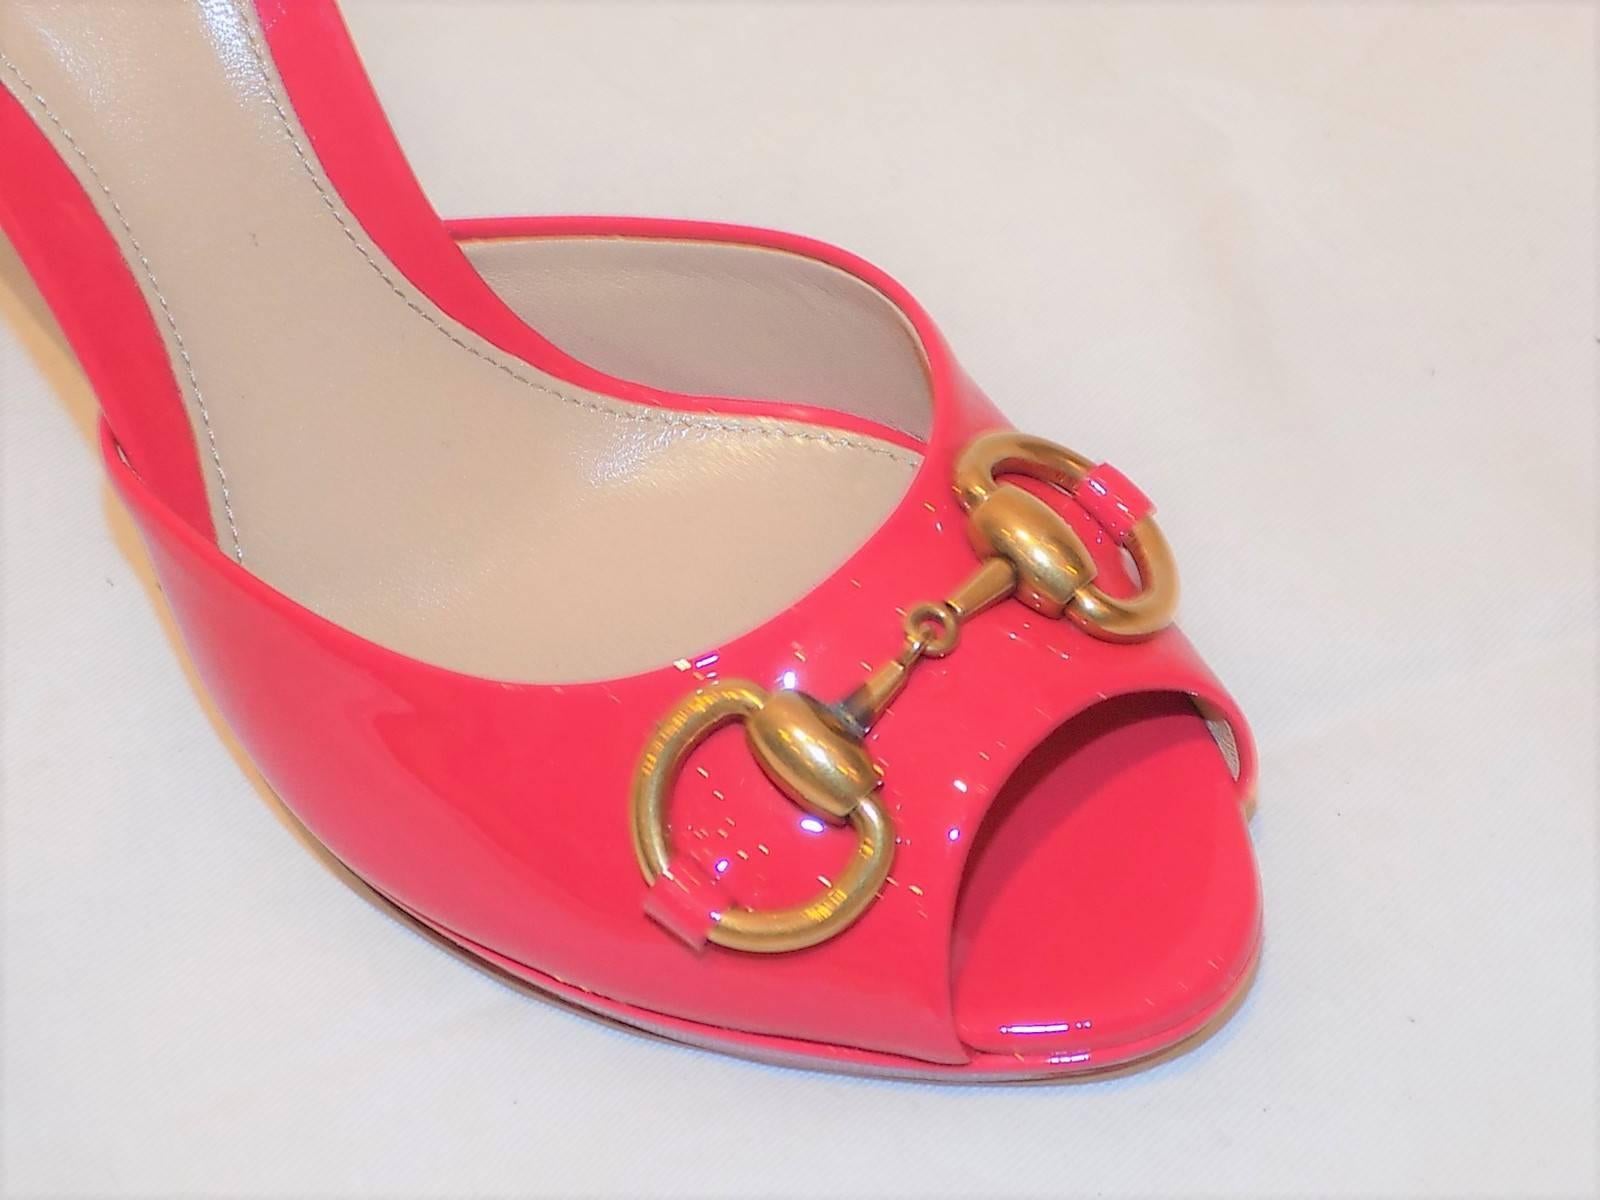 Gucci Women's Sandals Shoes HOLLYWOOD Pink Patent Leather Heels Slides Sz 35 us 5Gold tone  horse-bit with a 4 inch patent leather heel. New In box 
Retail $675